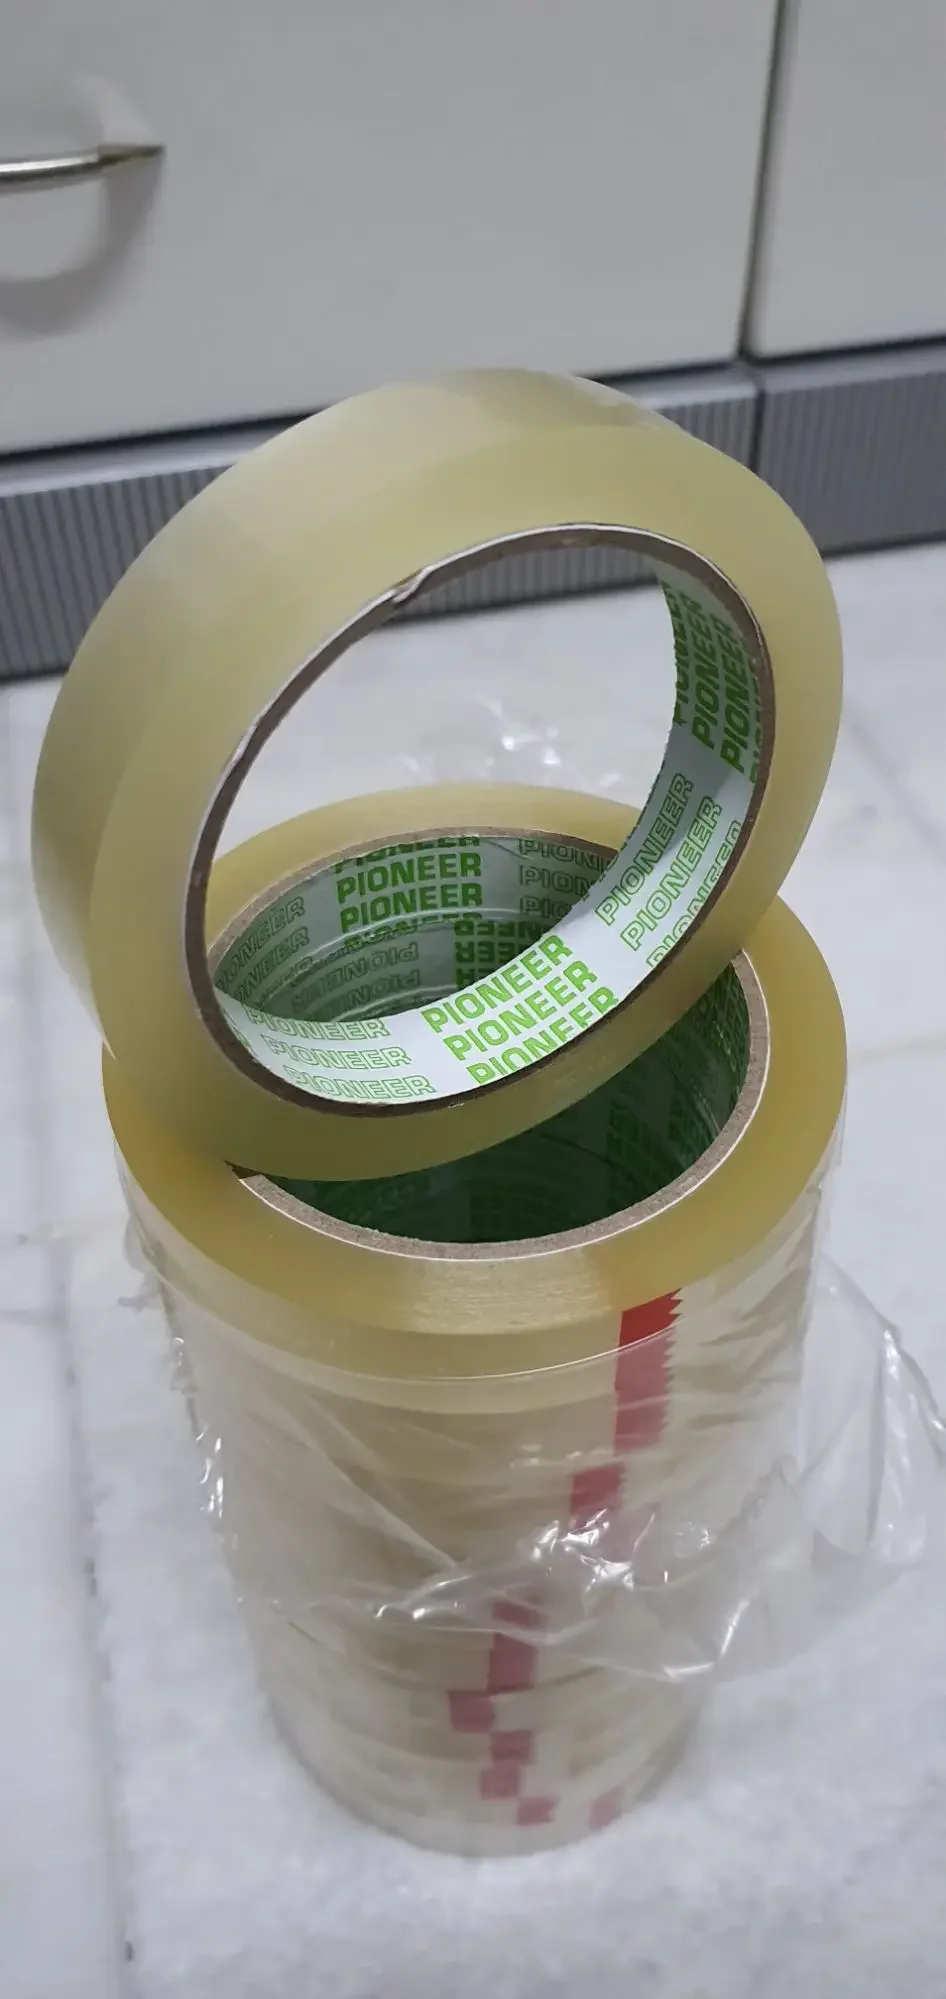 OPP STATIONERY CELLULOSE TAPE 18MM / 24MM X 80